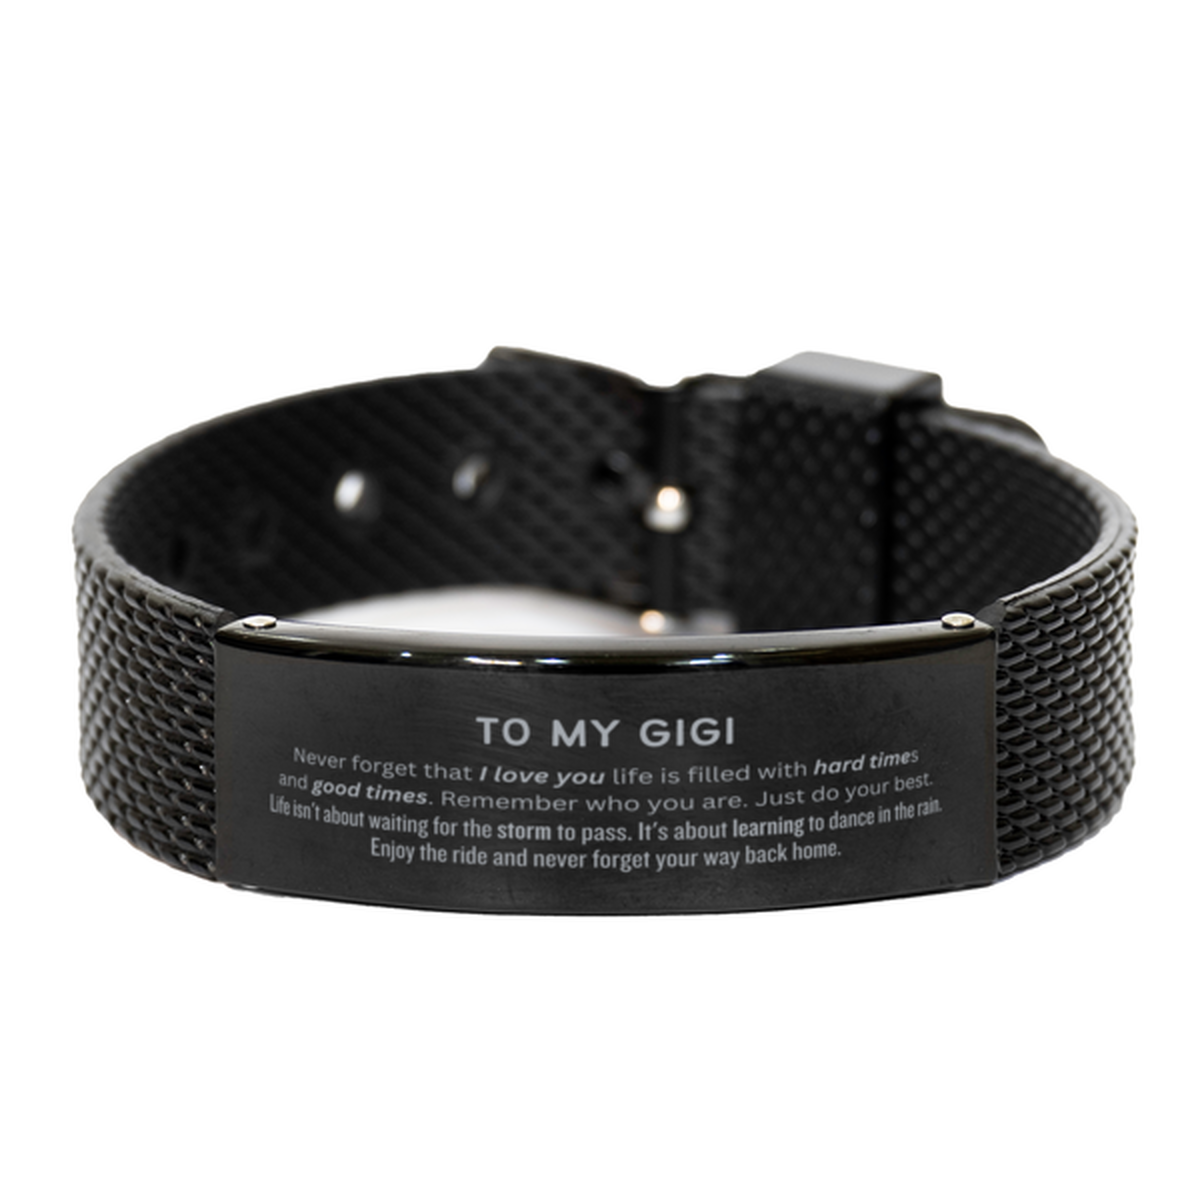 Christmas Gigi Black Shark Mesh Bracelet Gifts, To My Gigi Birthday Thank You Gifts For Gigi, Graduation Unique Gifts For Gigi To My Gigi Never forget that I love you life is filled with hard times and good times. Remember who you are. Just do your best